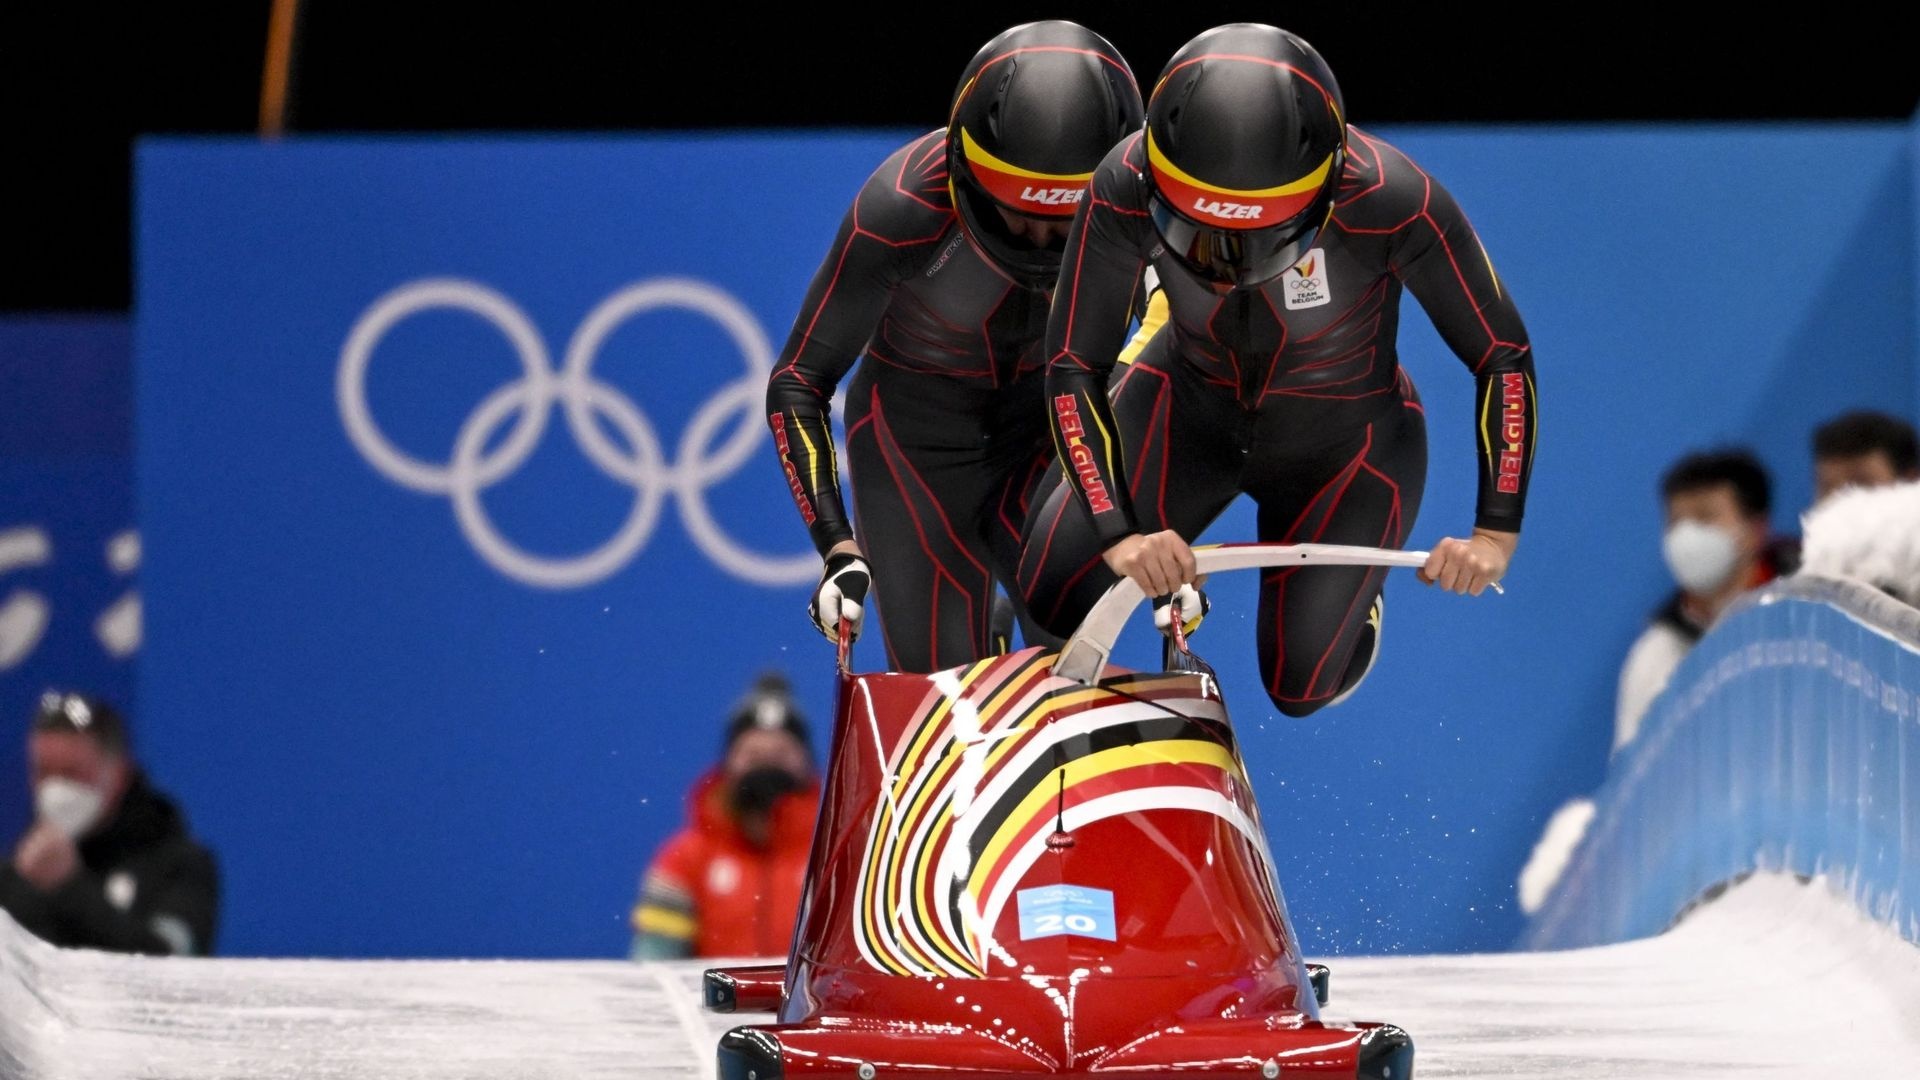 Bobsleigh: Beijing 2022 Winter Olympics, The two-man competitive event. 1920x1080 Full HD Background.